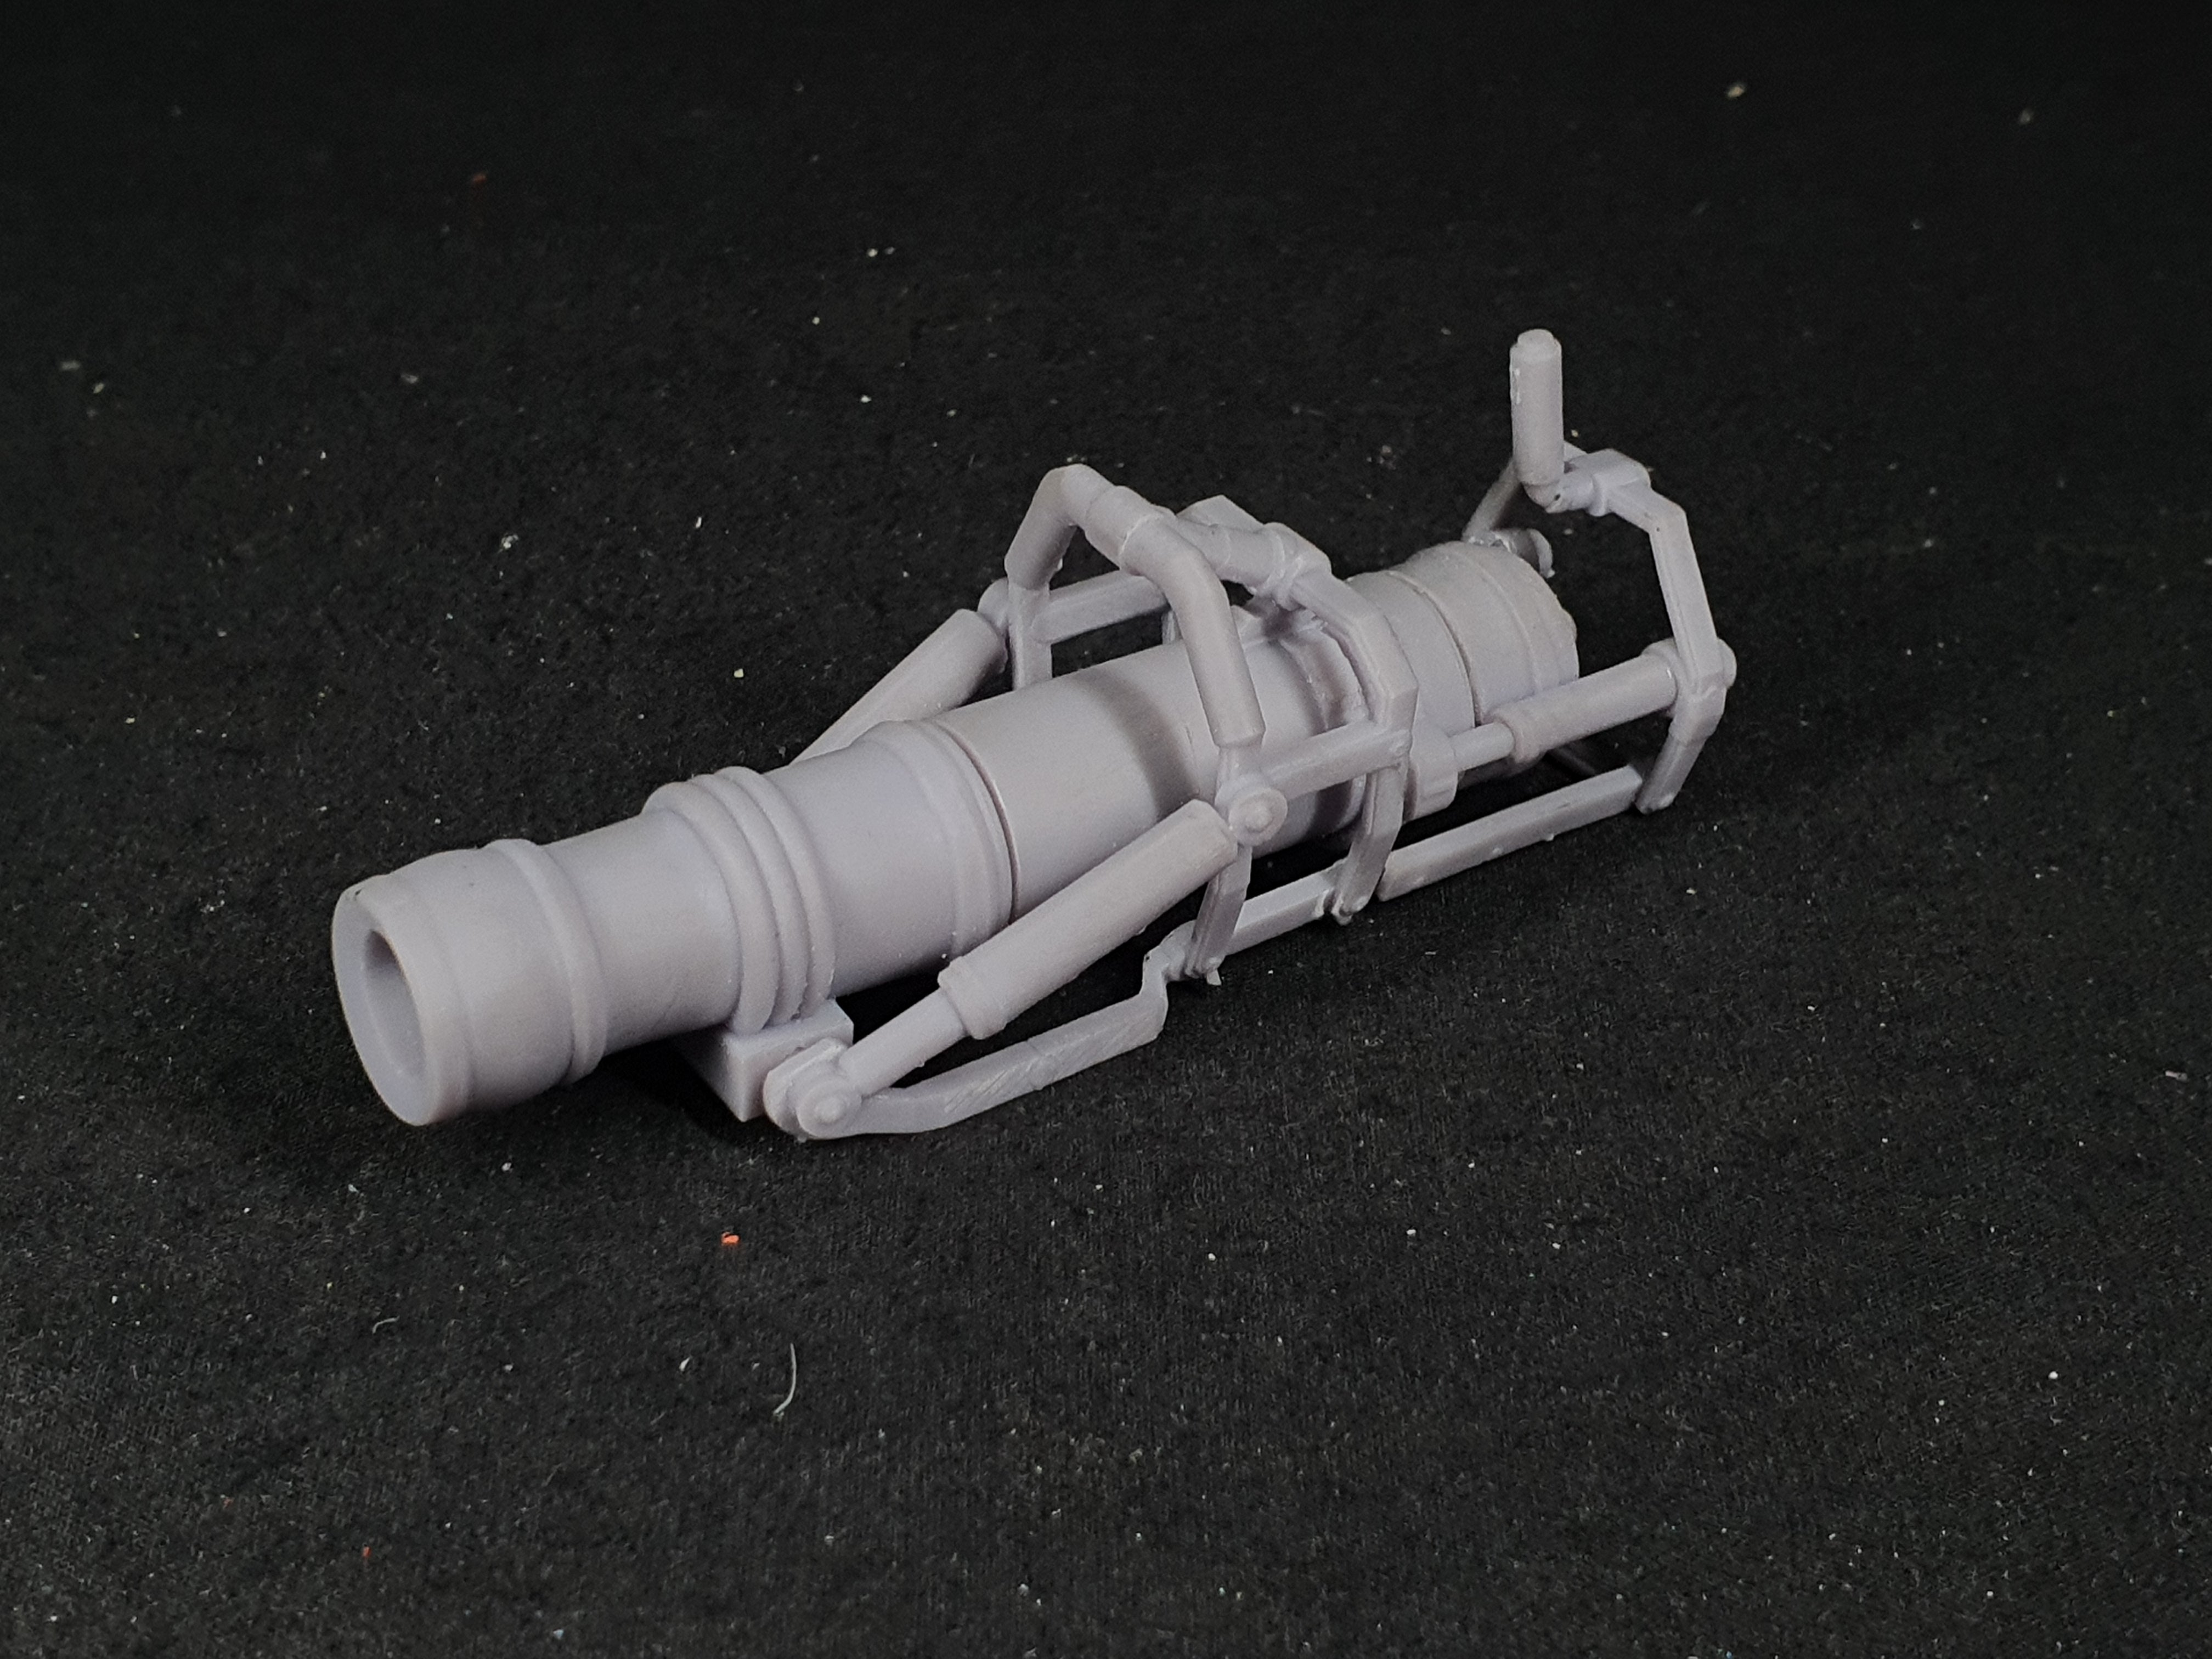 1/12 scale "OLD IRONSIDES" portable naval cannon